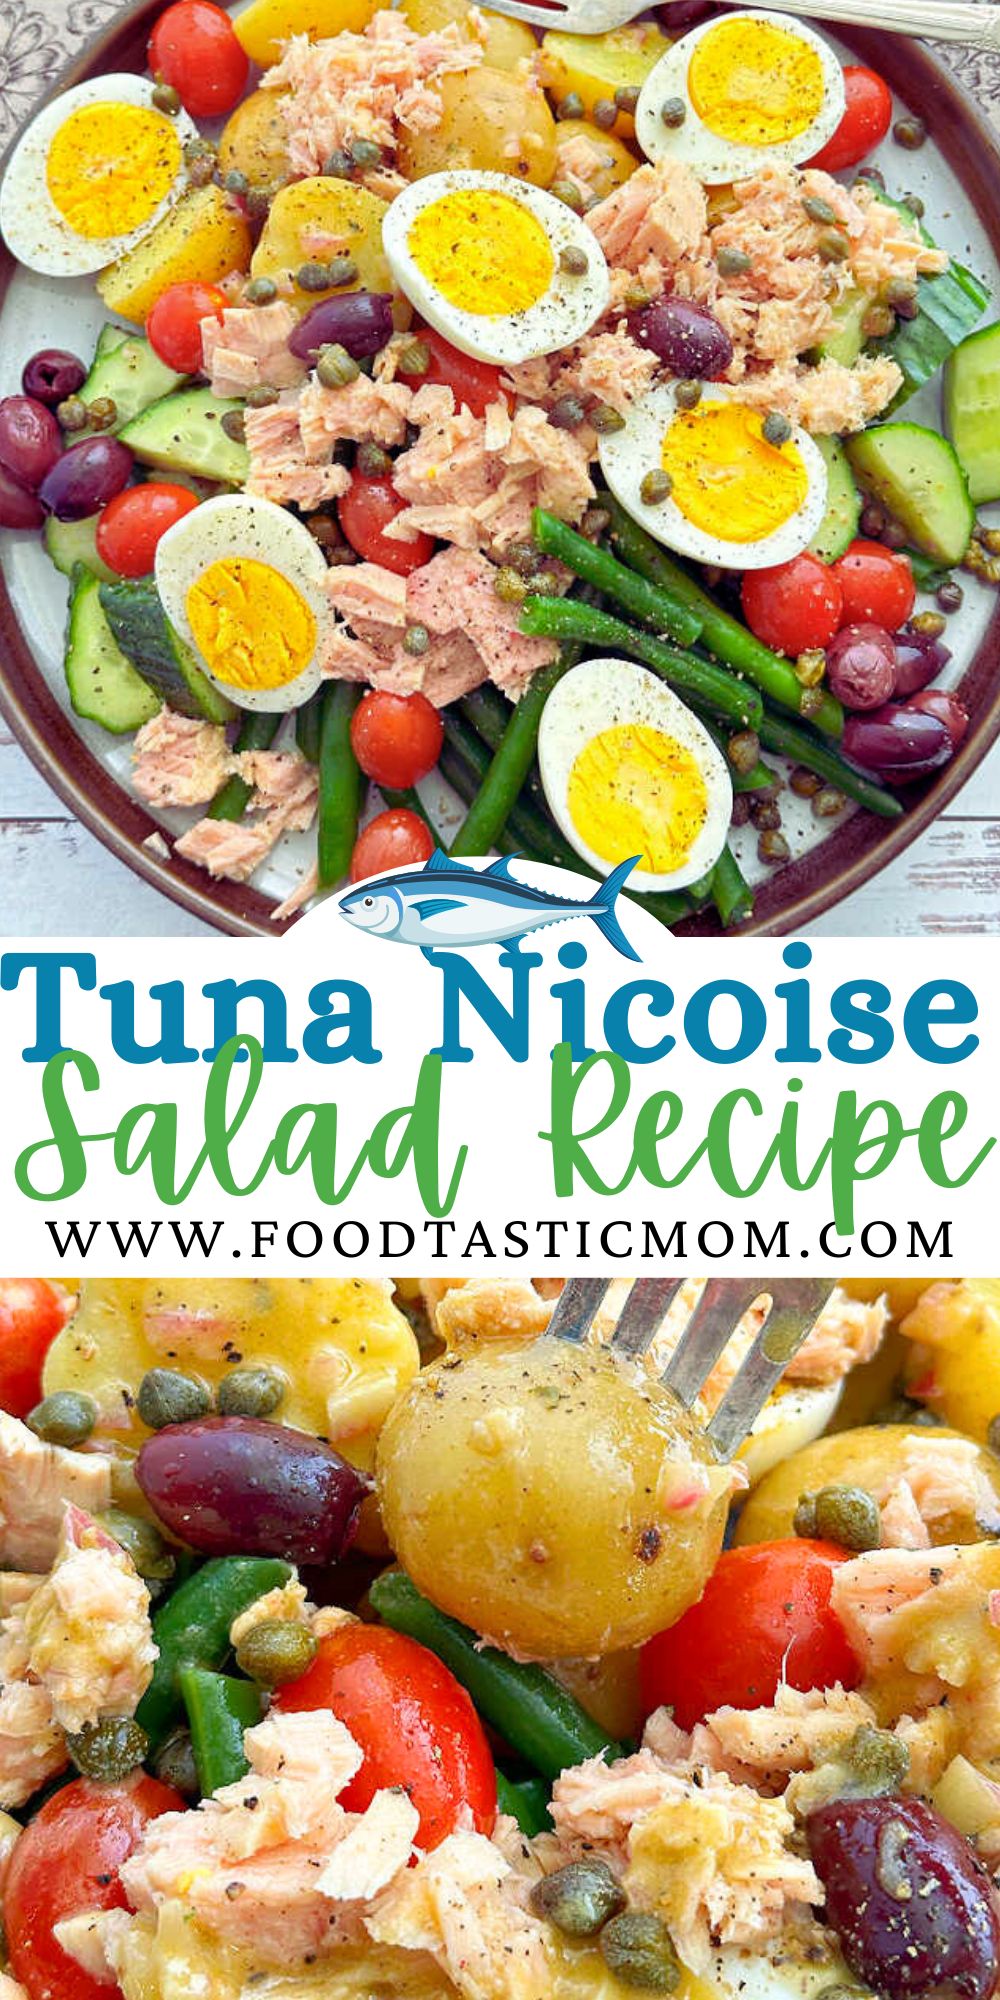 Discover secrets for streamlining the preparation and the best niçoise salad dressing for Tuna Nicoise Salad, a classic French salad. via @foodtasticmom